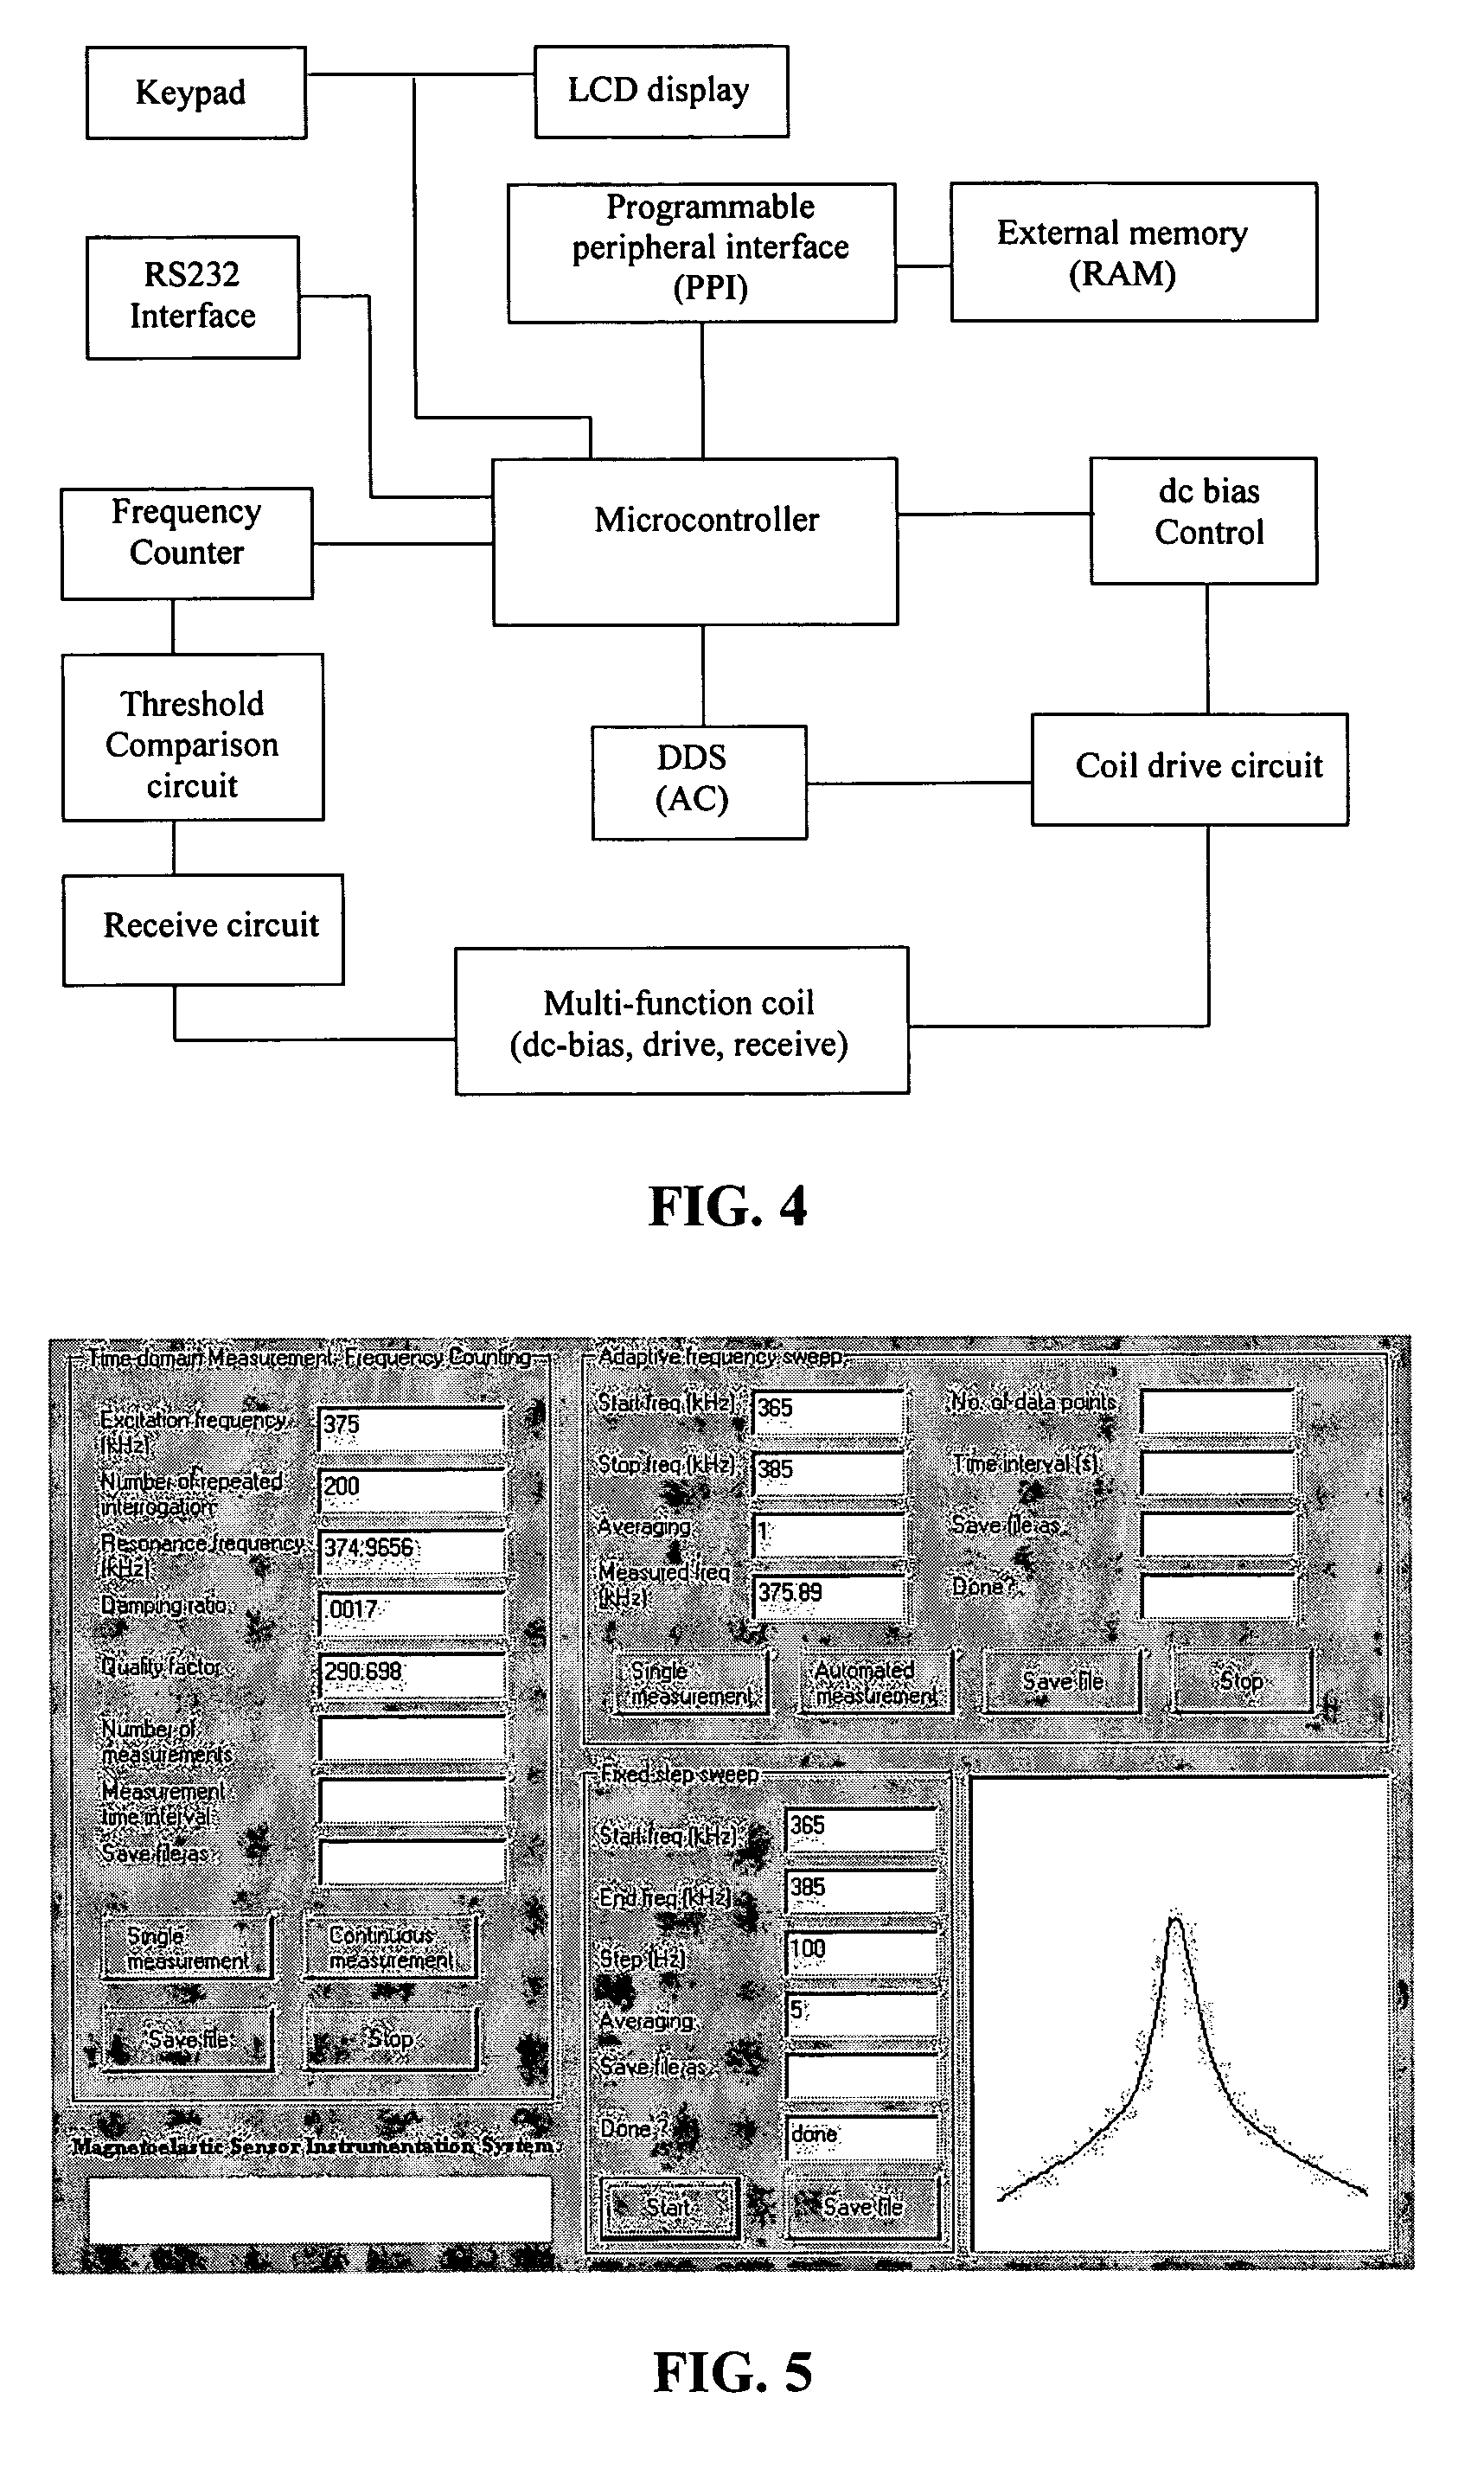 Technique and electronic circuitry for quantifying a transient signal using threshold-crossing counting to track signal amplitude